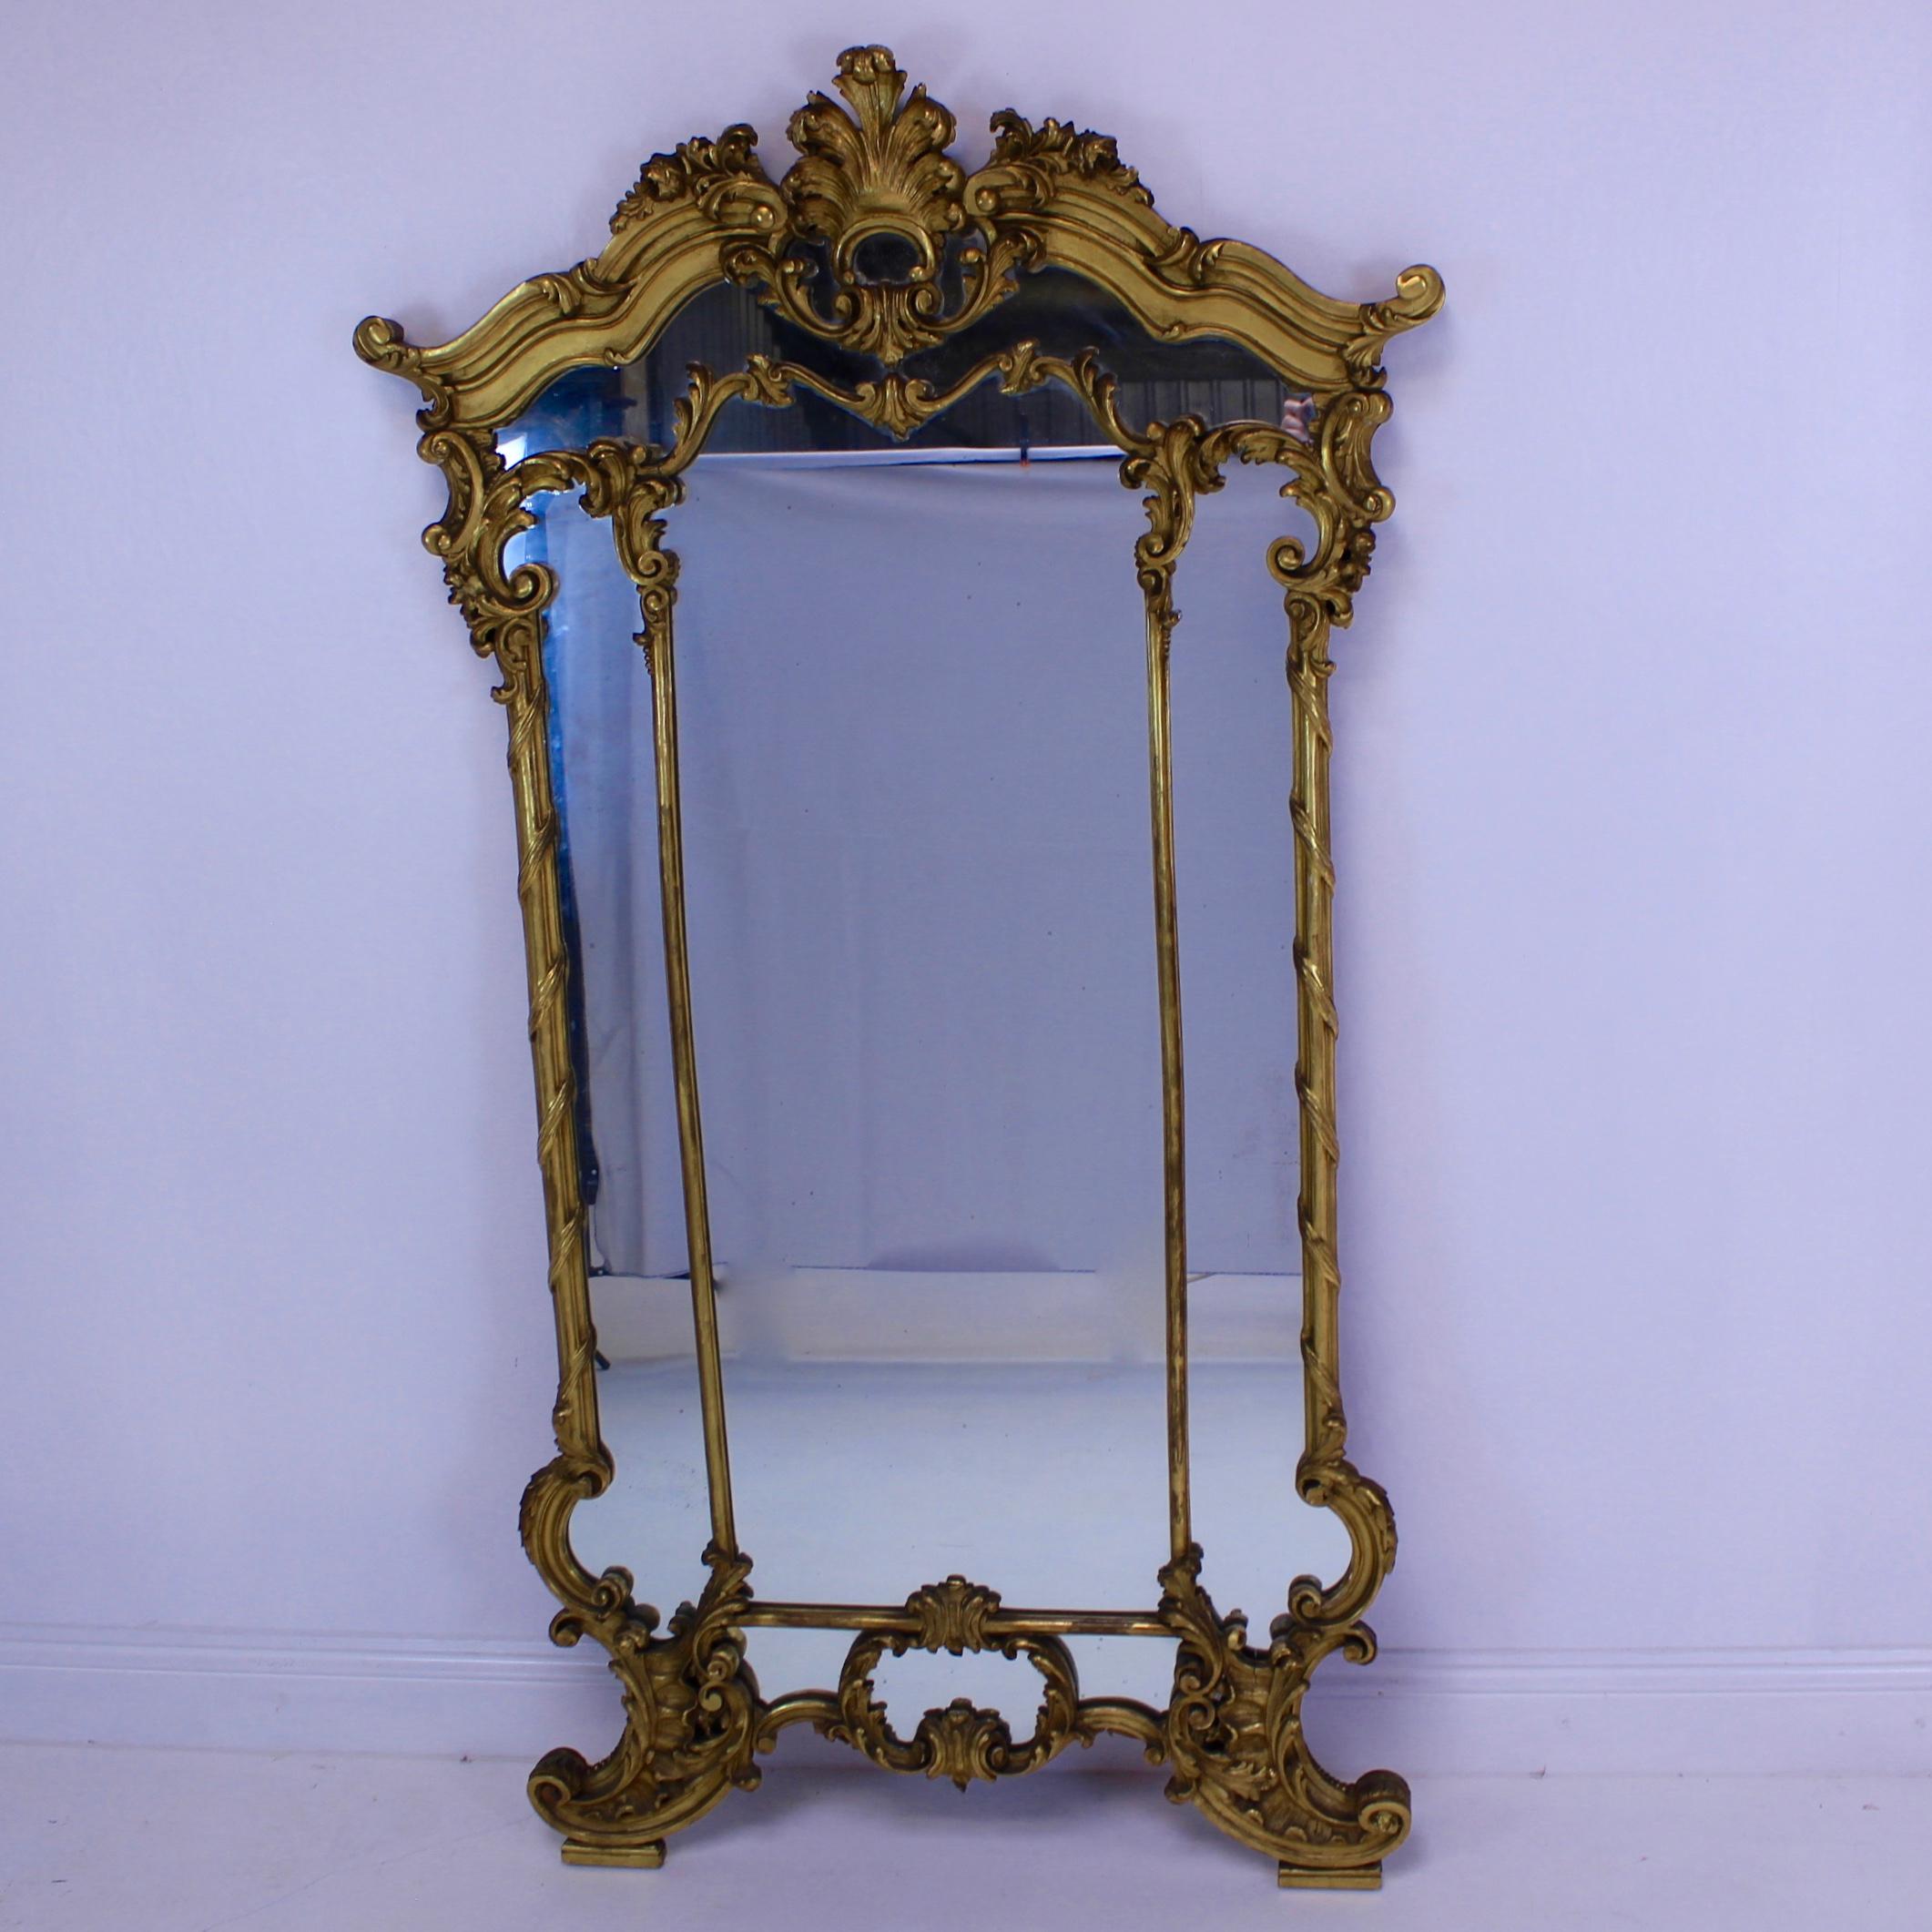 A good example of this carved wood gilt mirror, the design on the base makes it stand really well on a commode. This is a carved wood mirror, it’s not made from gesso.